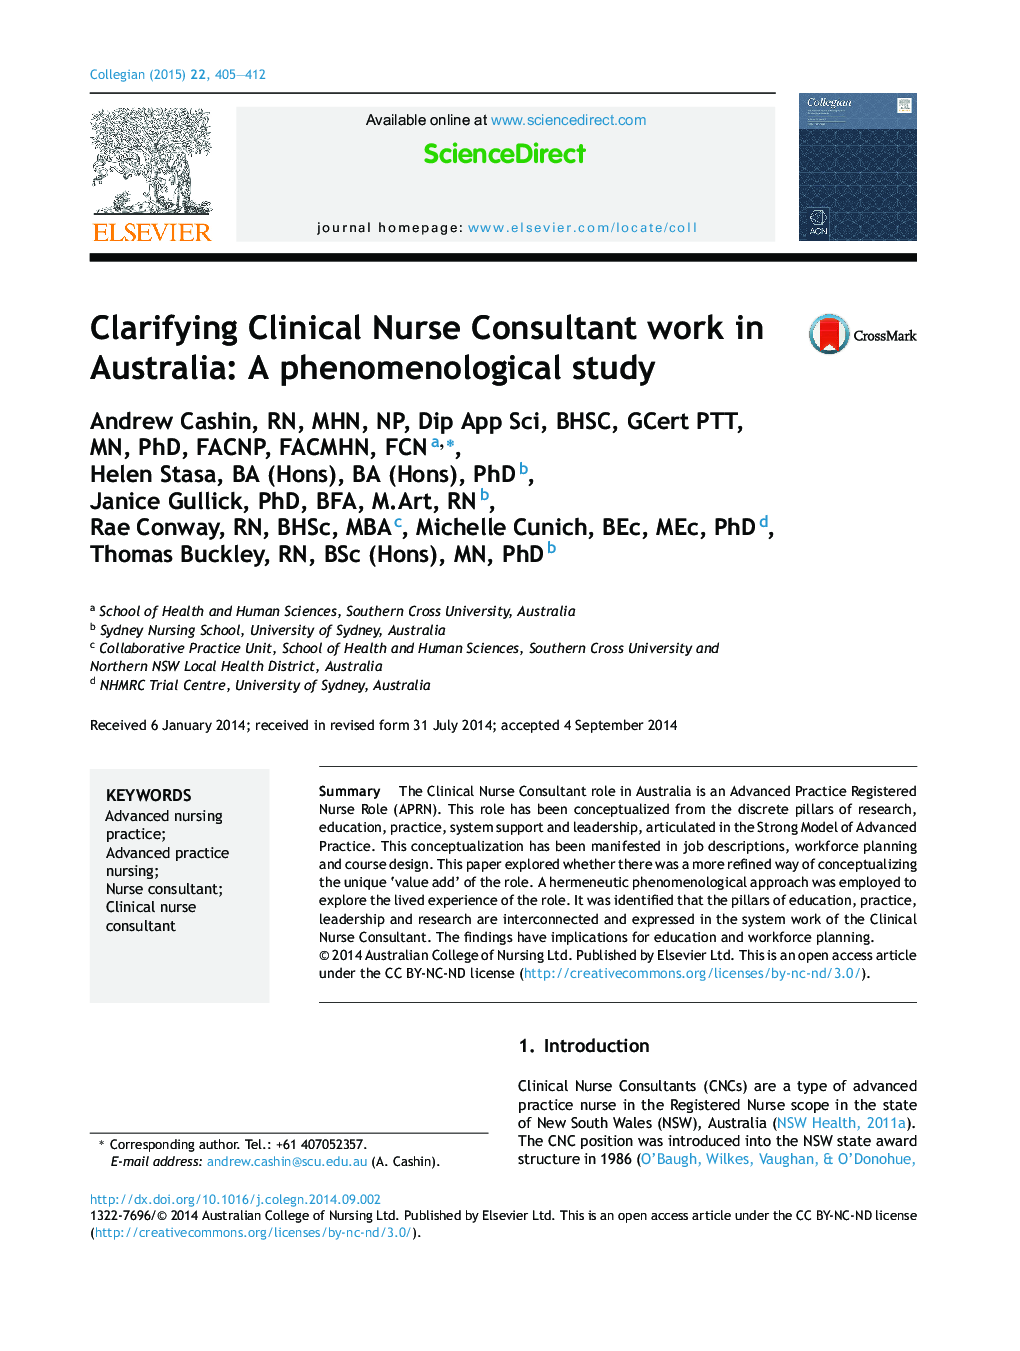 Clarifying Clinical Nurse Consultant work in Australia: A phenomenological study